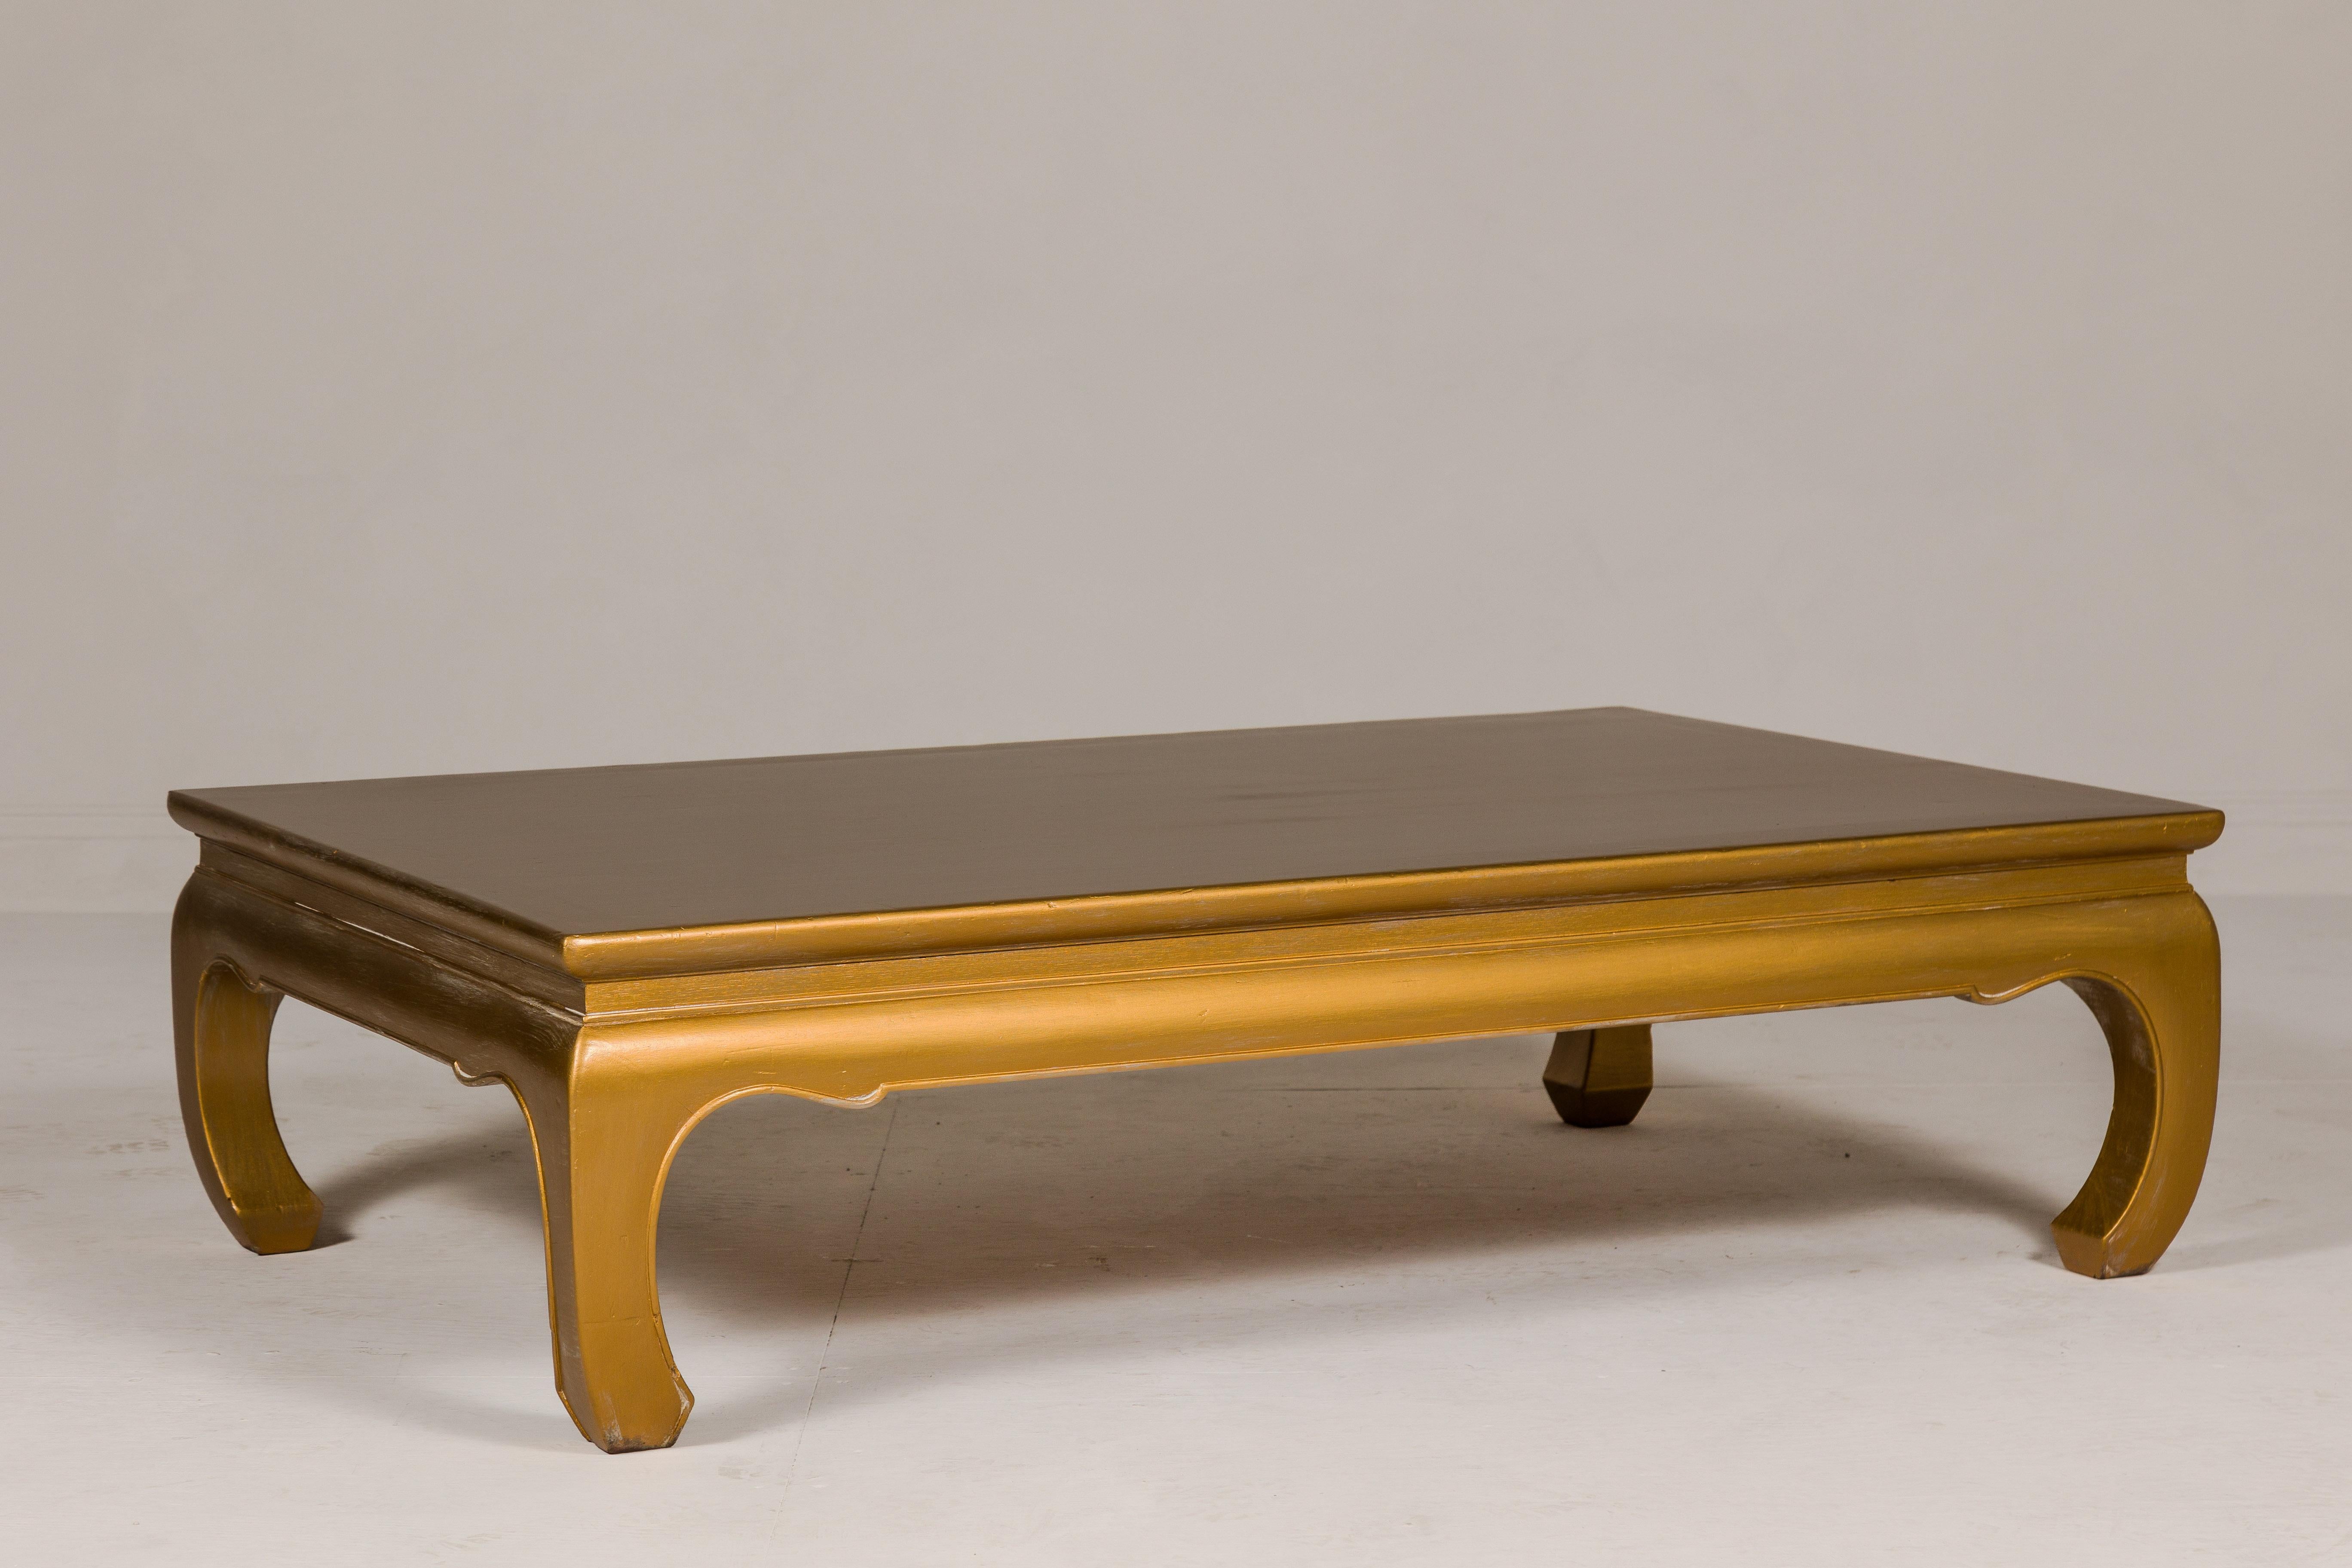 Gold Lacquered Ming Dynasty Style Chow Leg Coffee Table with Carved Apron For Sale 3